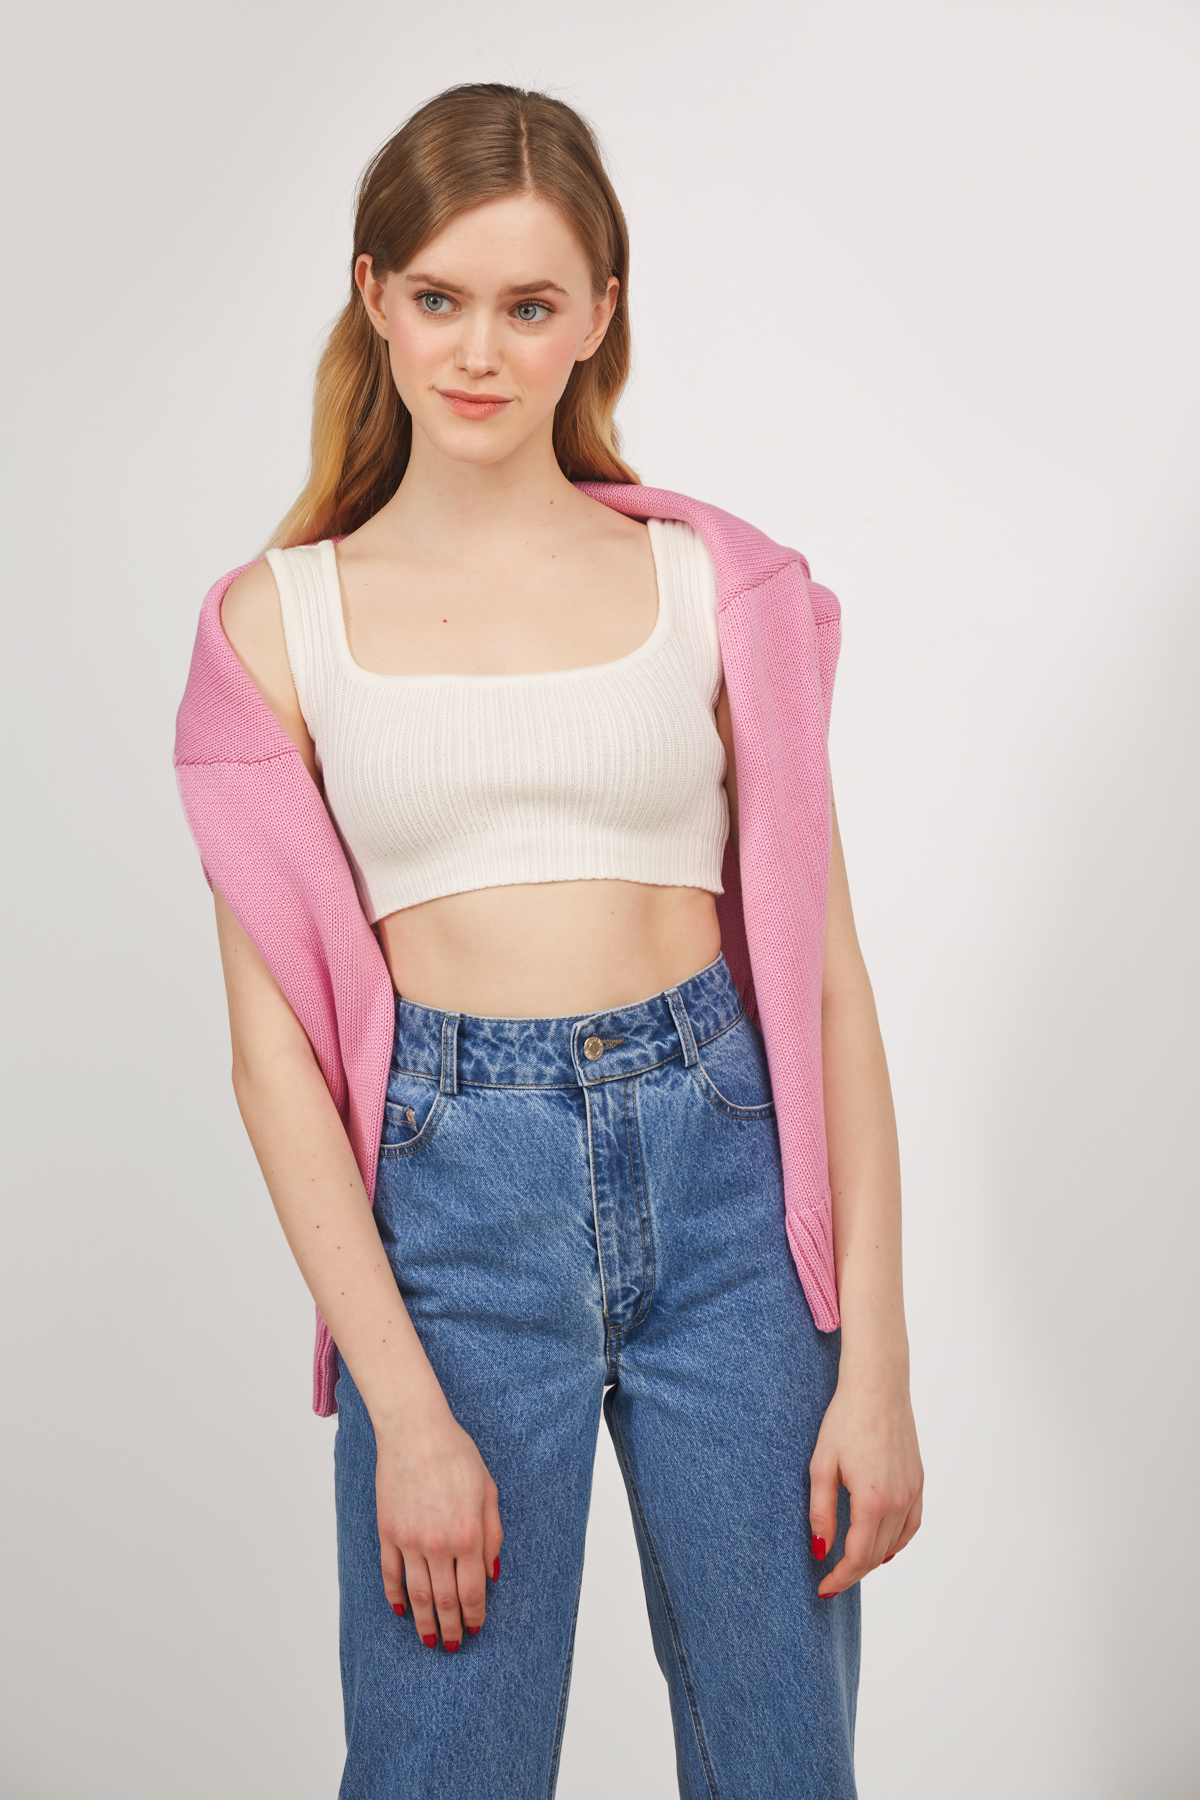 Milky white knitted crop top, photo 1